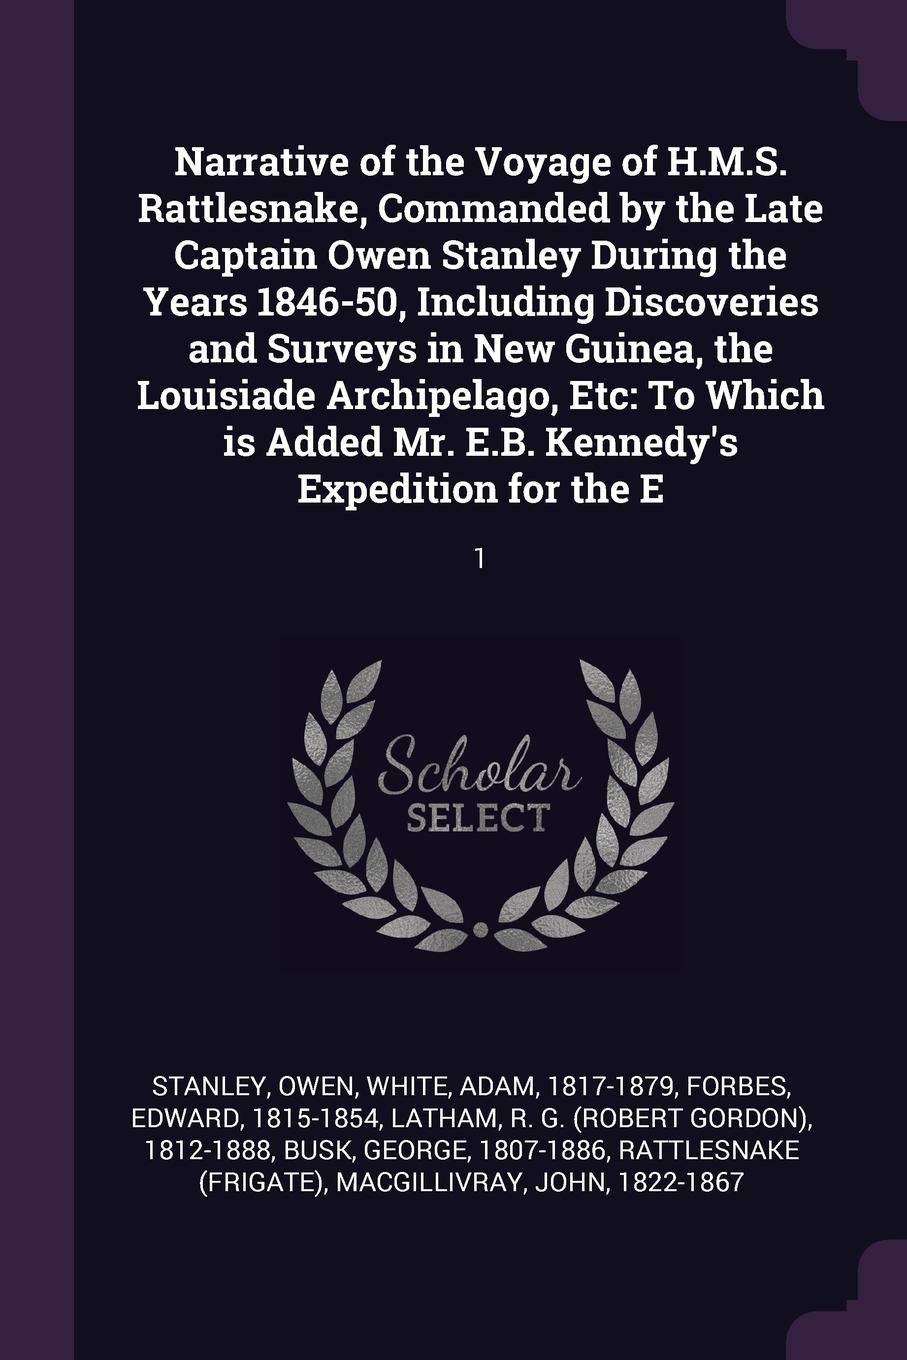 Narrative of the Voyage of H.M.S. Rattlesnake, Commanded by the Late Captain Owen Stanley During the Years 1846-50, Including Discoveries and Surveys in New Guinea, the Louisiade Archipelago, Etc. To Which is Added Mr. E.B. Kennedy`s Expedition fo...